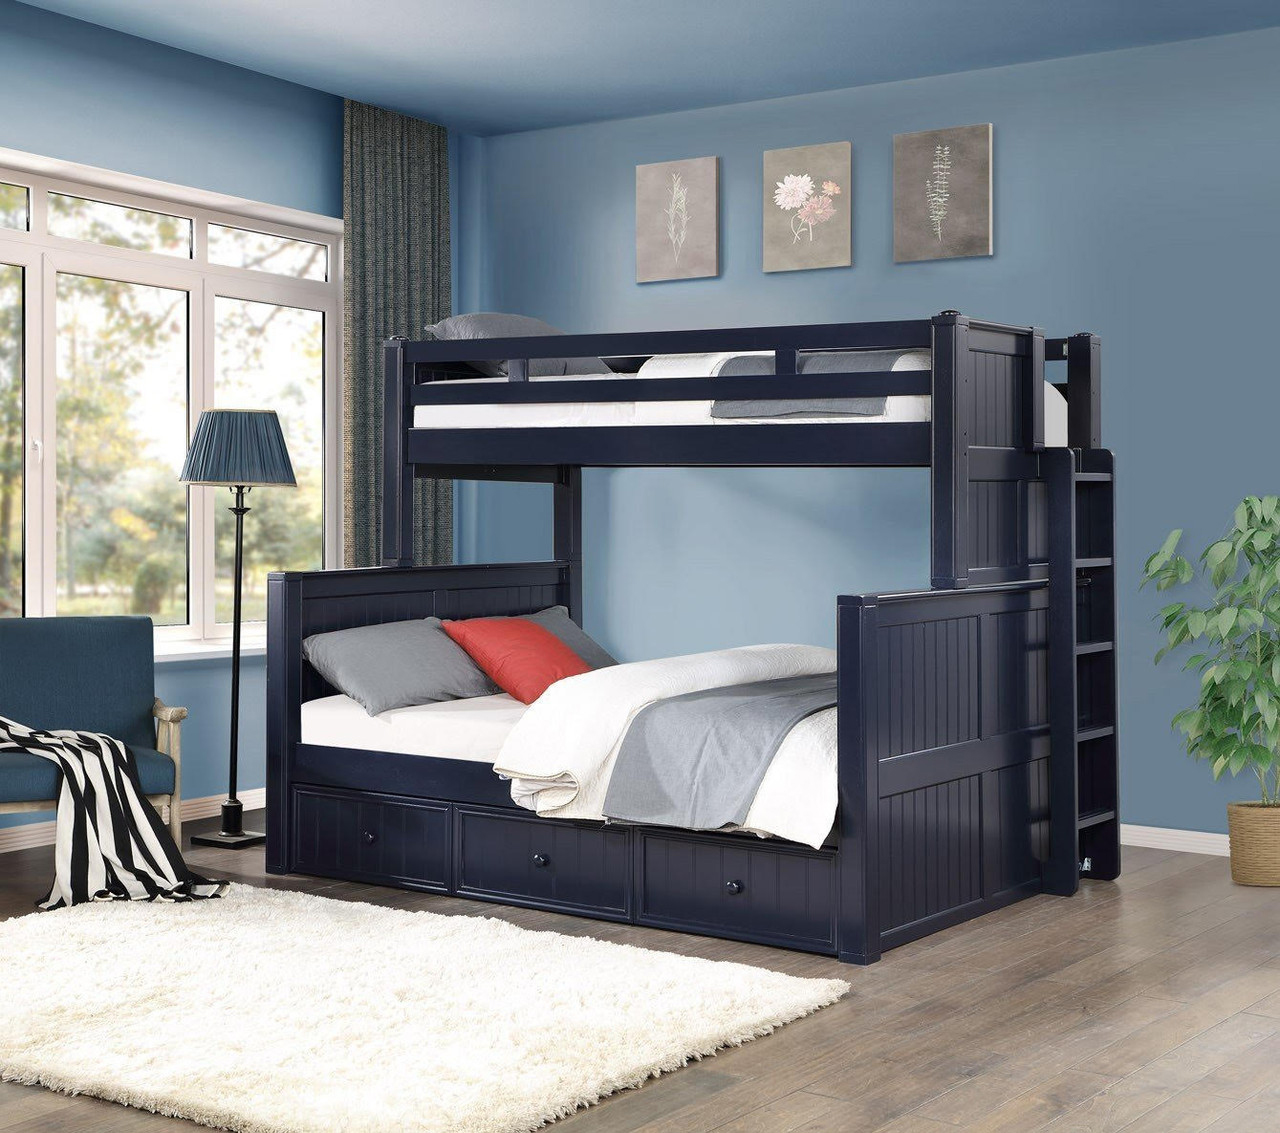 Twin XL over Queen Bunk Bed - Coastal Style